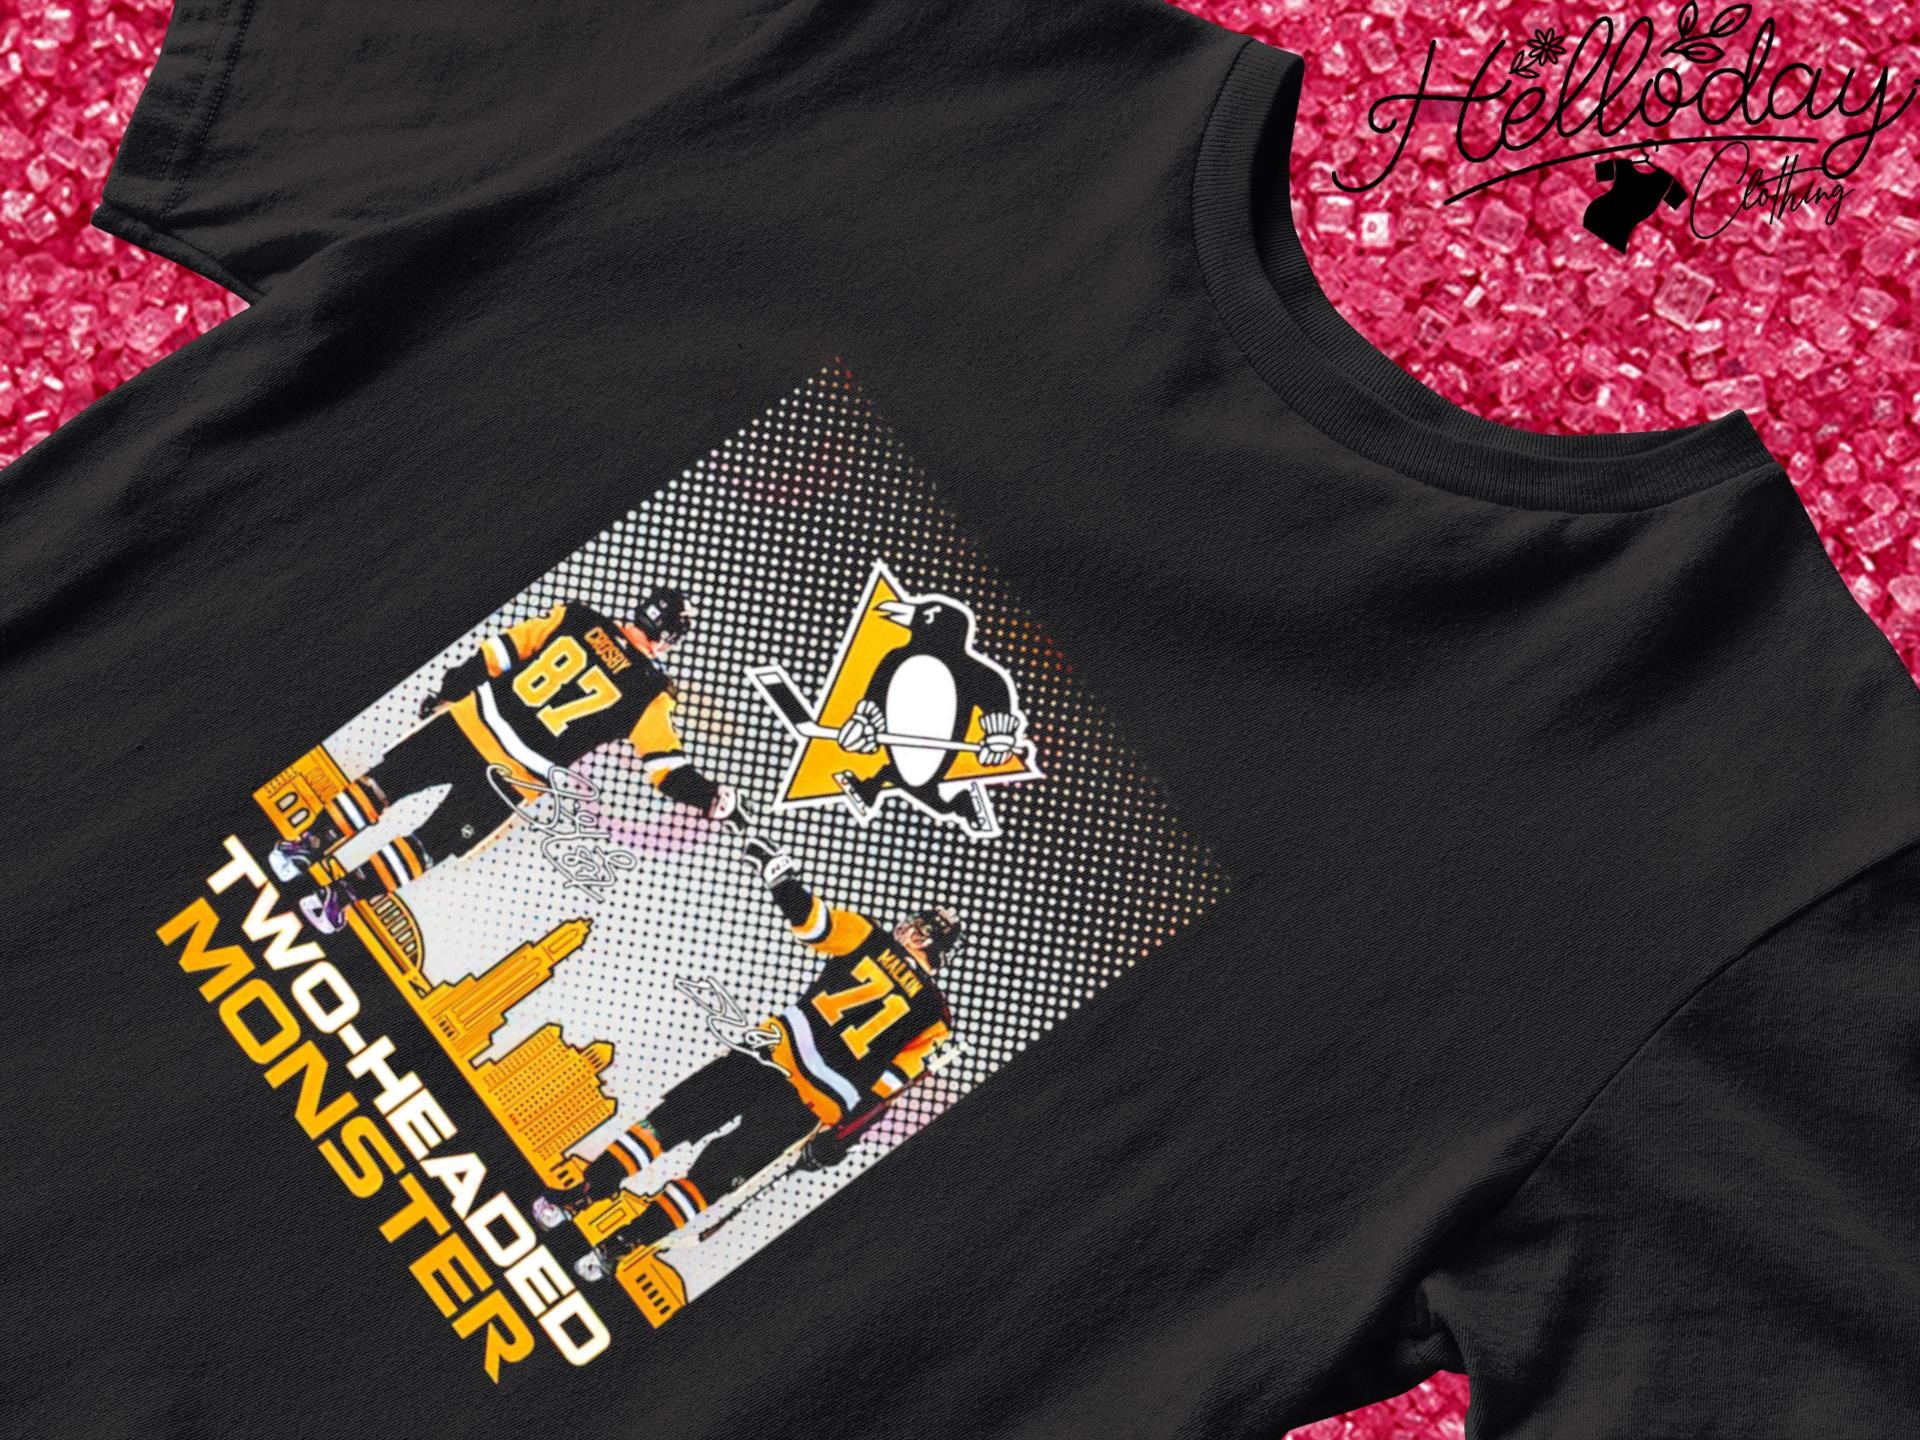 Crosby and Malkin Two-headed Monster signature shirt